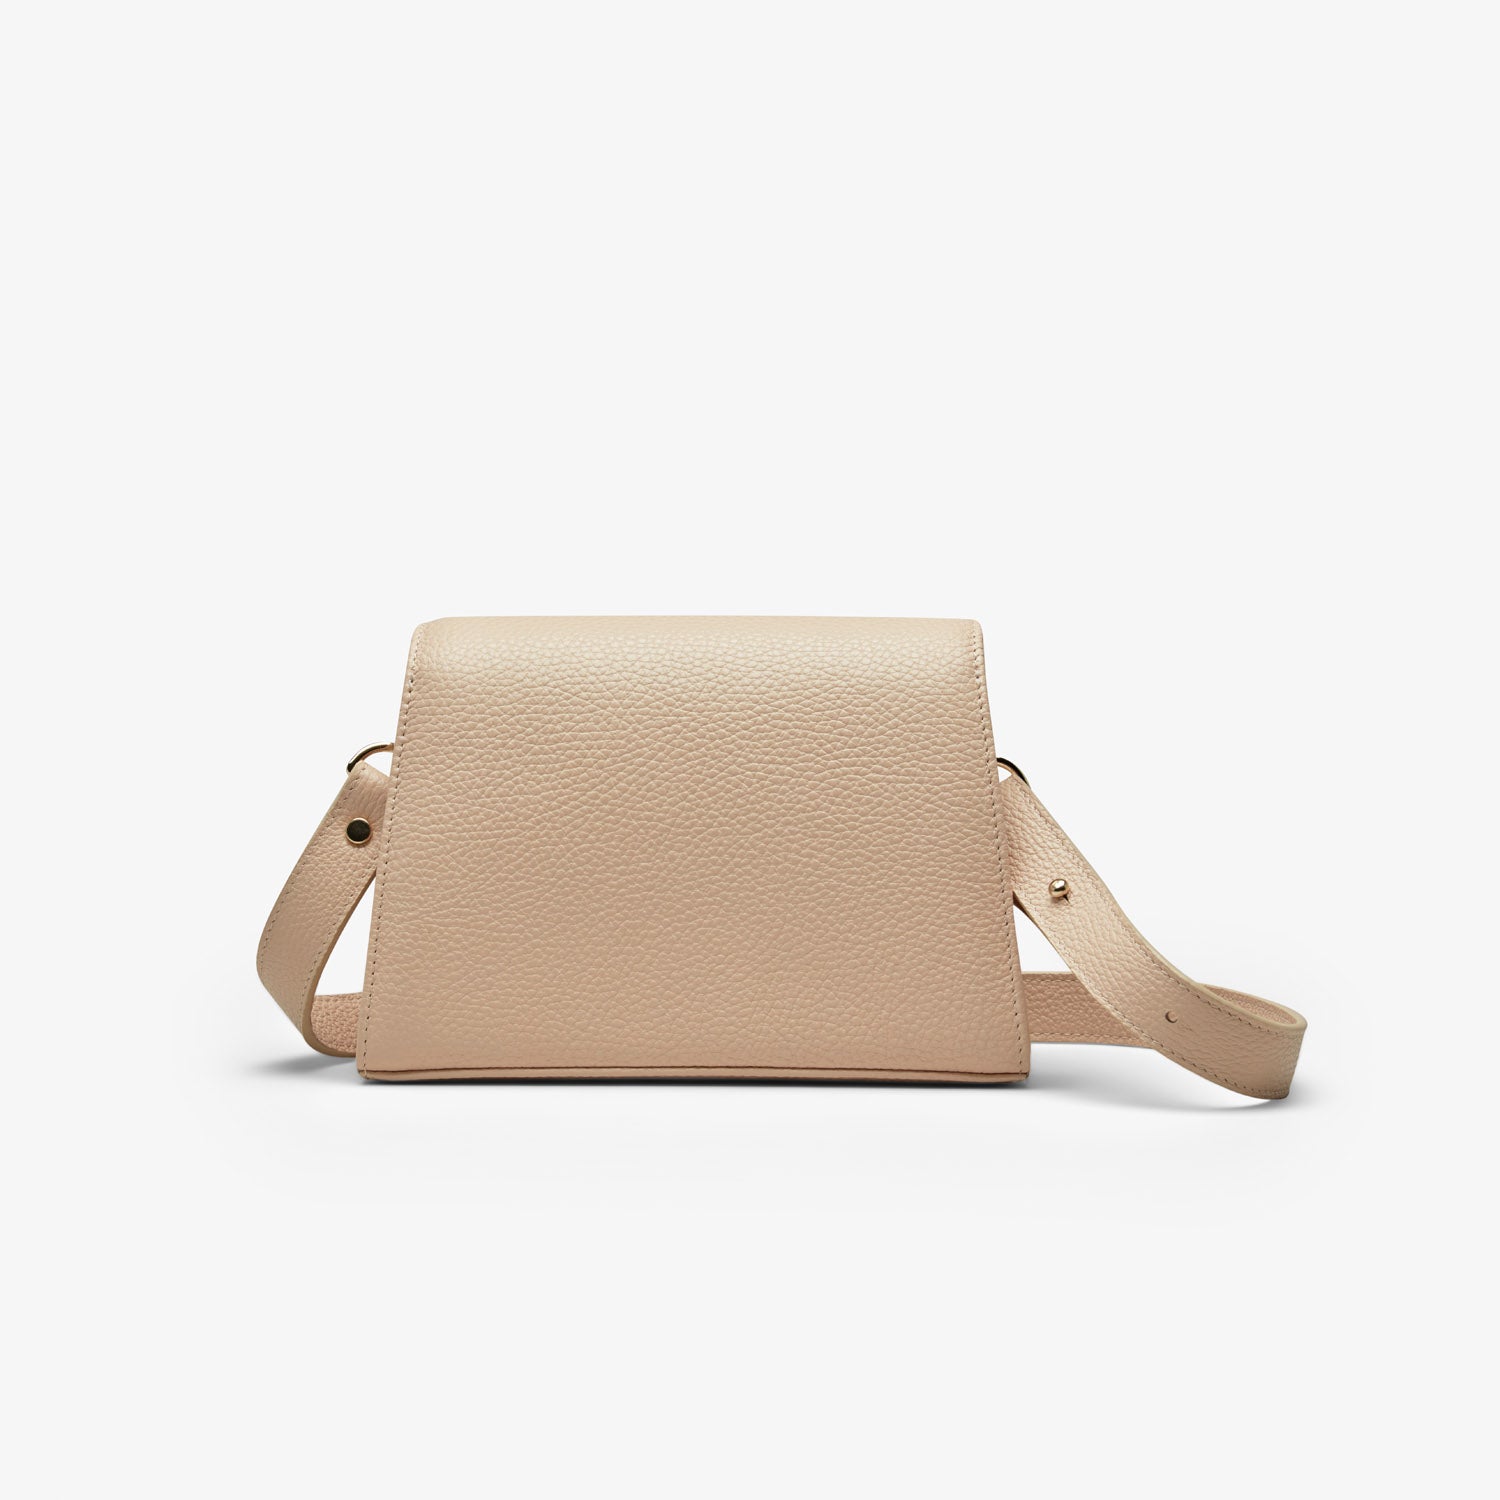 A beige grained leather handbag with light gold metalware and an adjustable strap for a comfortable crossbody or shoulder fit. 